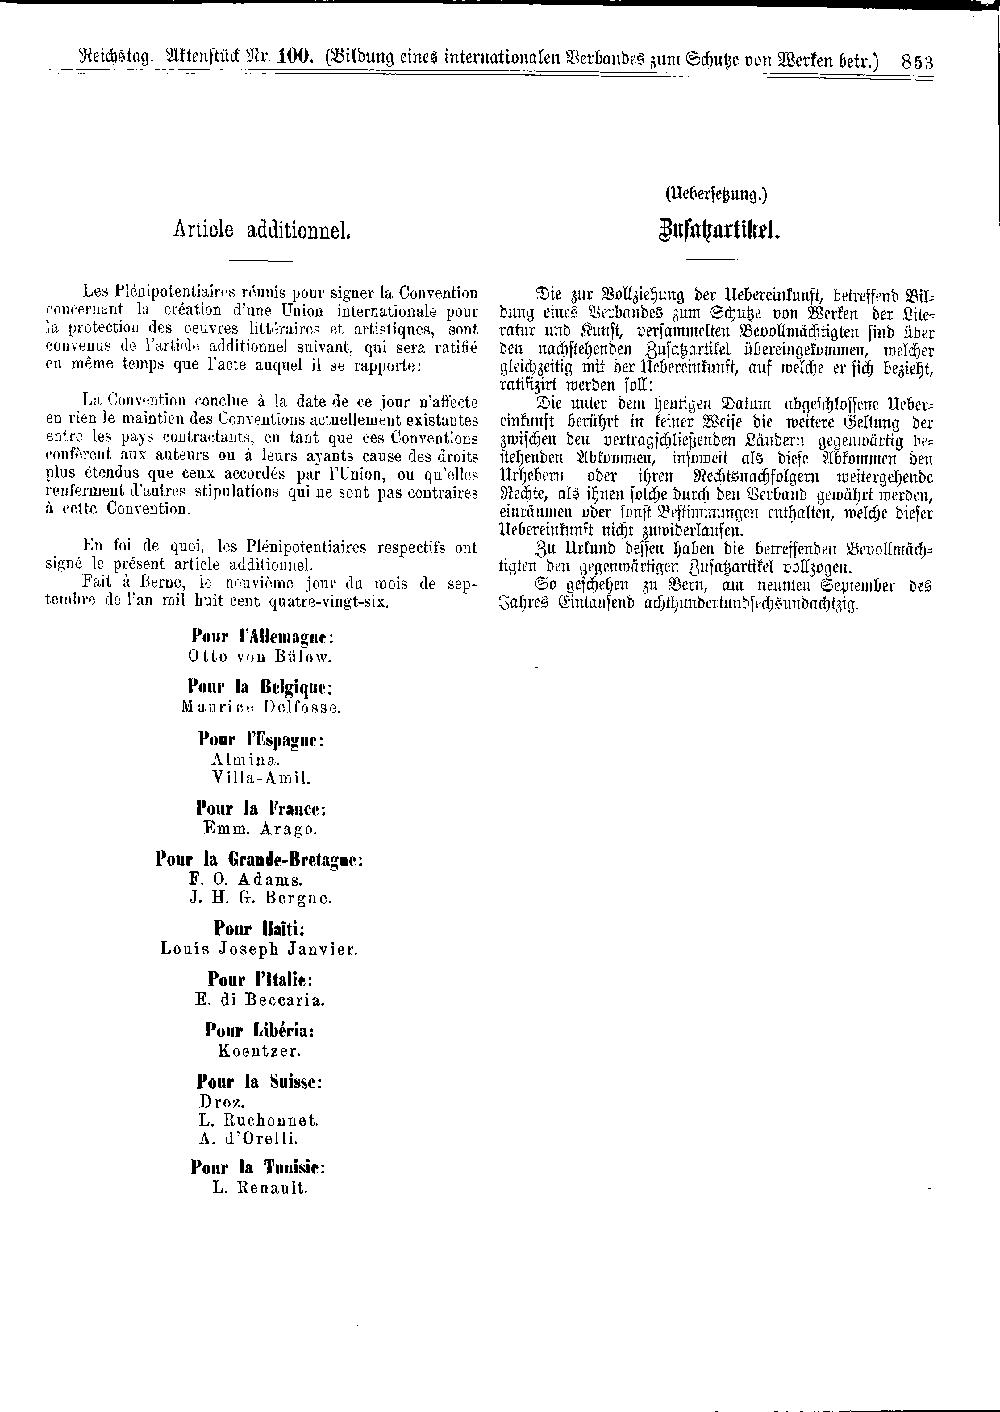 Scan of page 853